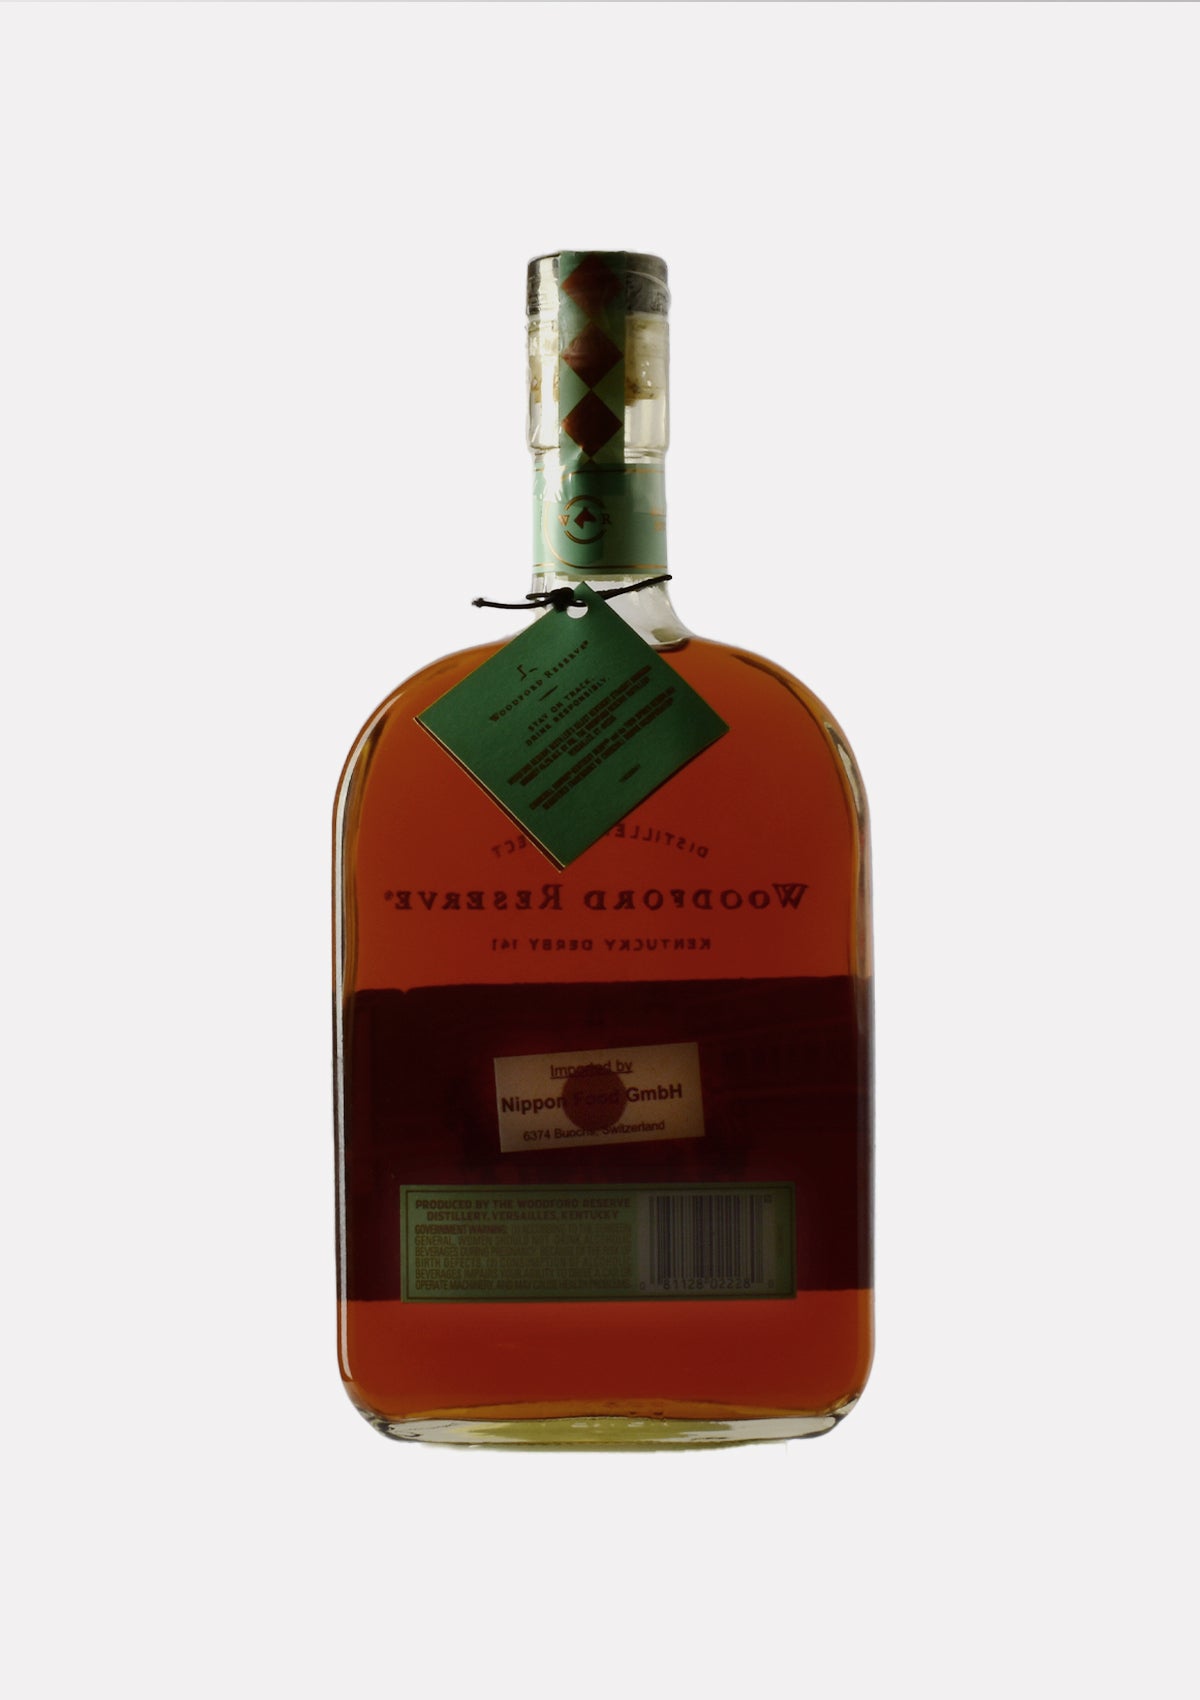 Woodford Reserve 141 Kentucky Derby